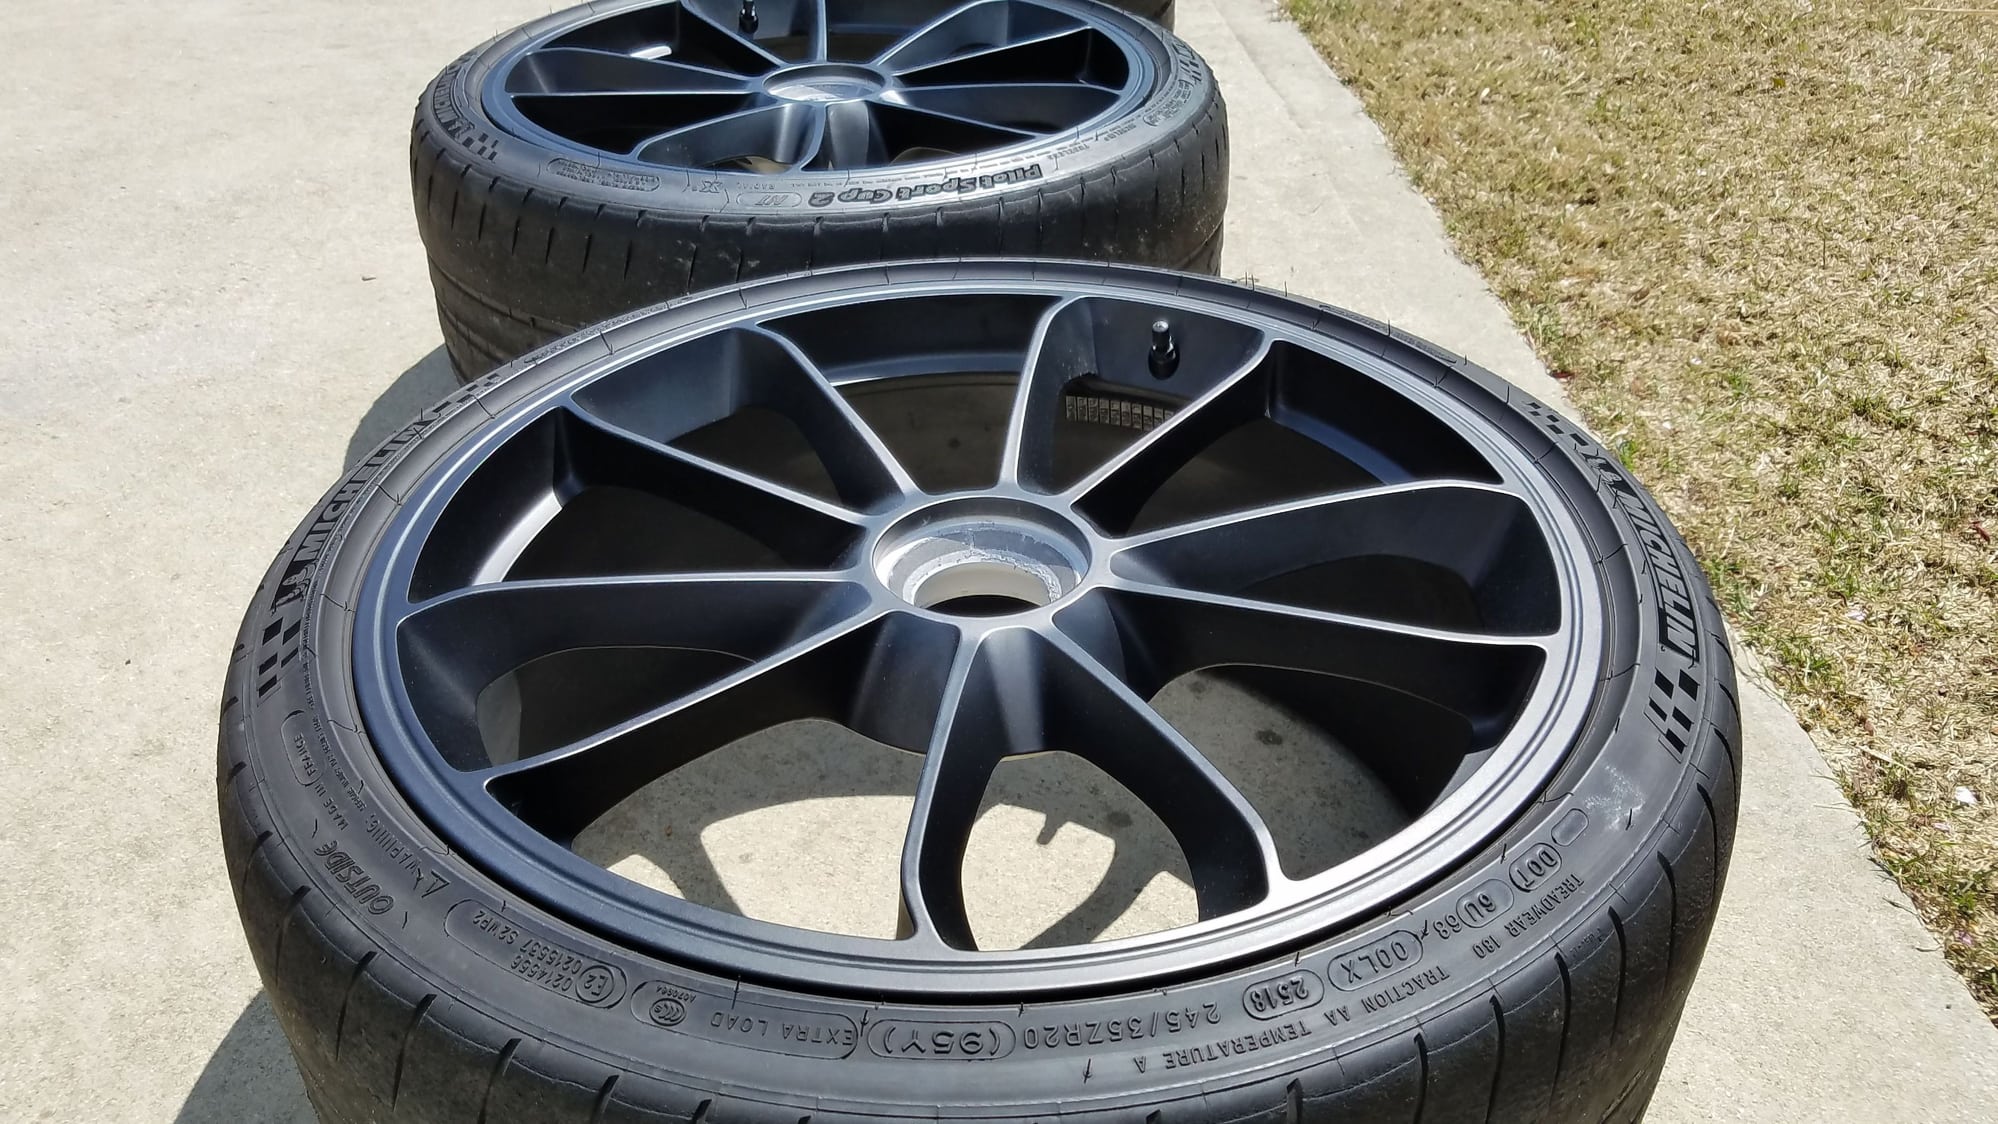 Wheels and Tires/Axles - 991.2 GT3 centerlock tools, wheels, tires and more for sale or trade - Used - 2018 to 2019 Porsche 911 - Buford, GA 30519, United States